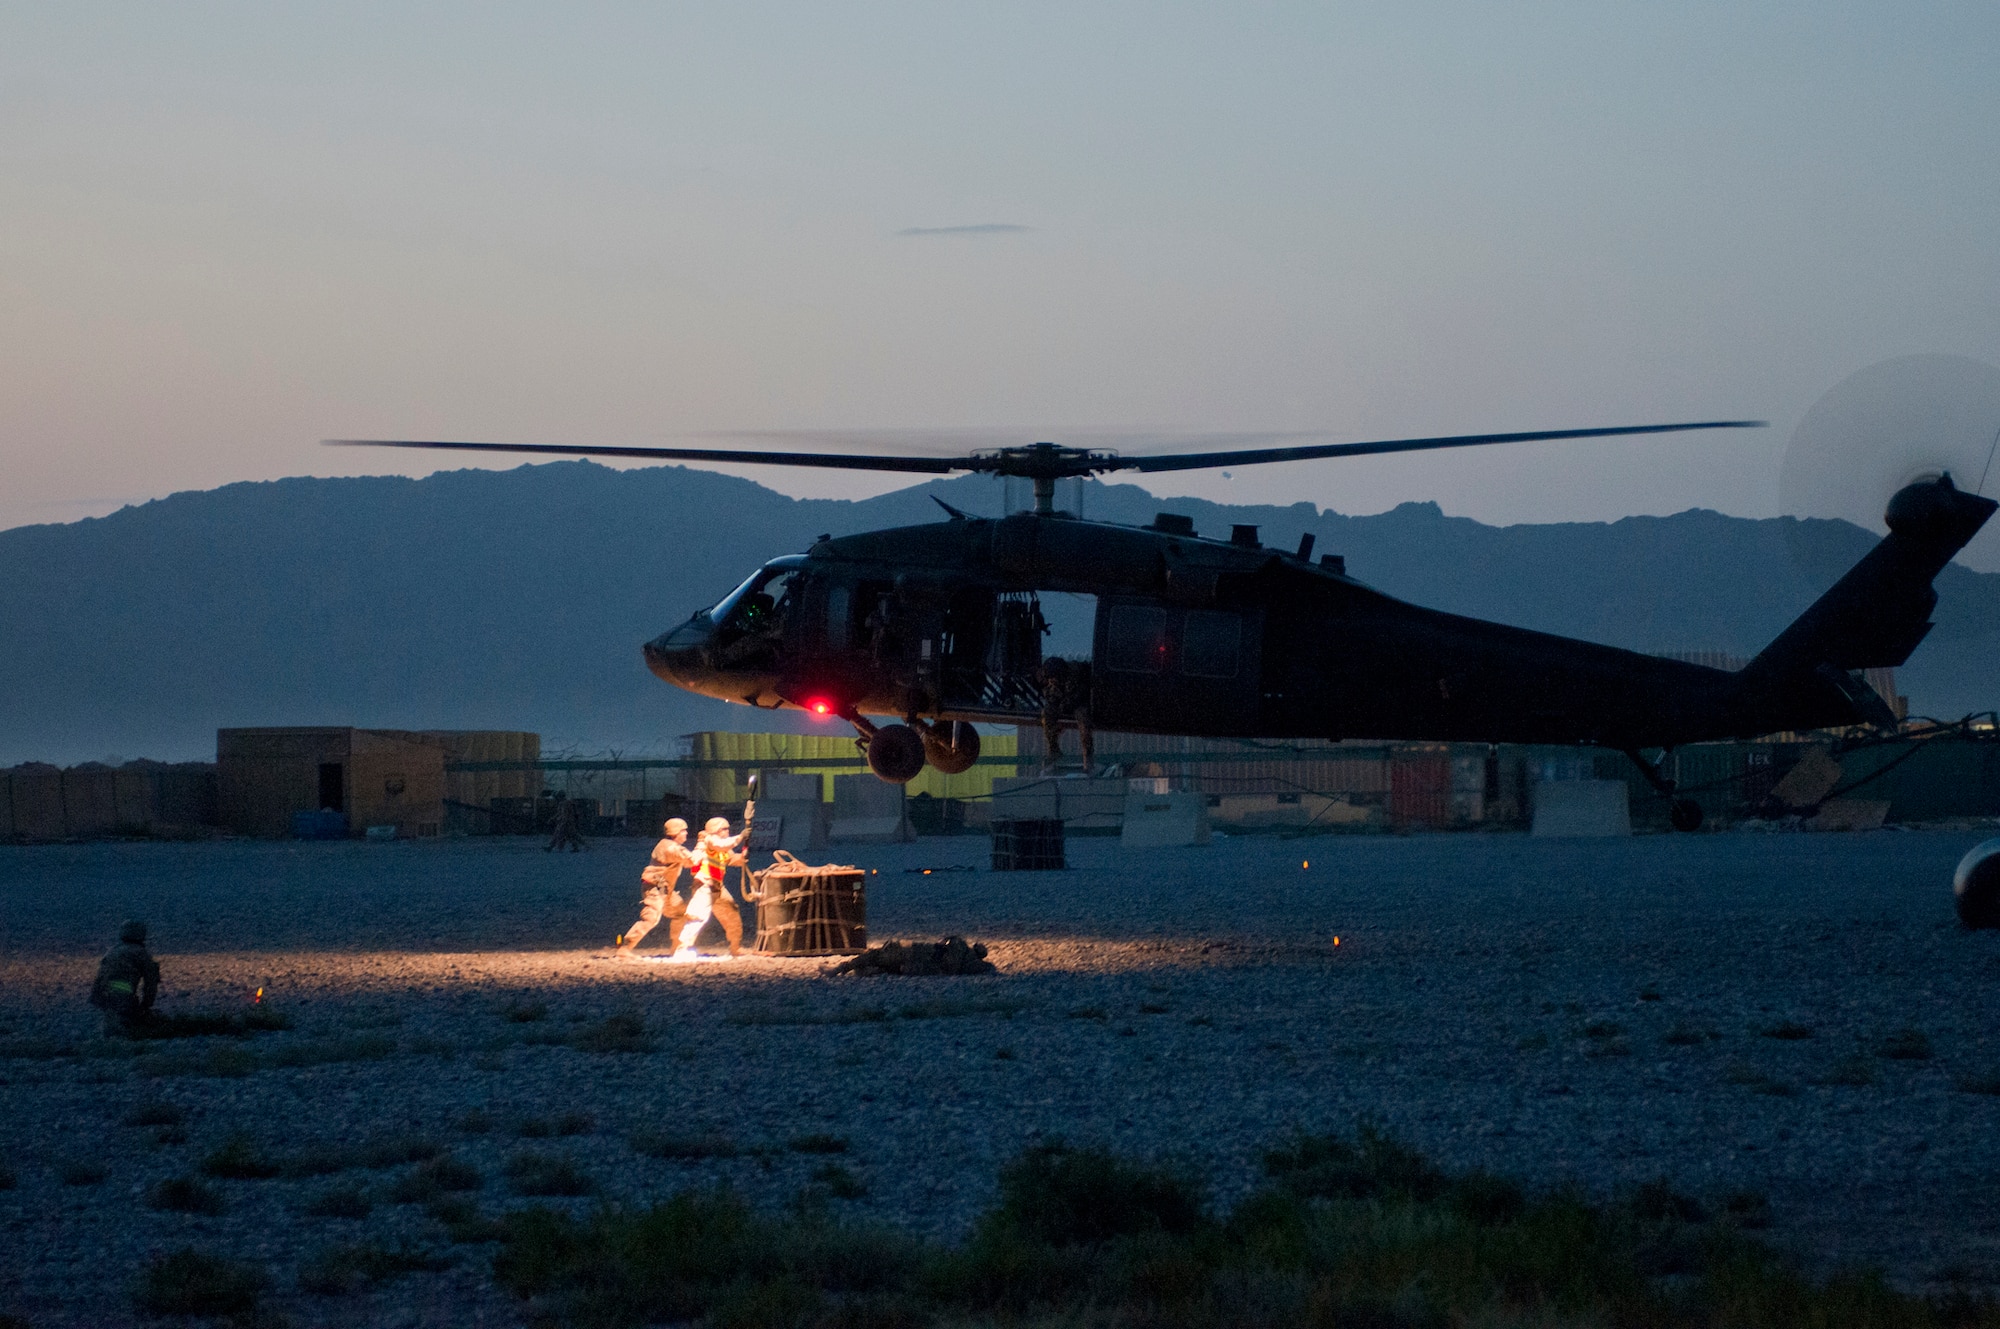 U.S. Air Force Tech. Sgt. Sean Buck and Airman 1st Class Pedro Cahua, both with the 451st Expeditionary Aircraft Maintenance Squadron, prepare to hook a 1,800 pound A-22 cargo bag to an approaching UH-60 Black Hawk helicopter flown by Soldiers of the 3rd Combat Aviation Brigade during a joint-coalition sling load training mission at Kandahar Airfield, Afghanistan, June 1, 2013. The training provided coalition members the opportunity to learn the concepts of illuminating a landing zone as well as in-flight cargo sling loading. (U.S. Air Force photo/Capt. Brian Maguire)